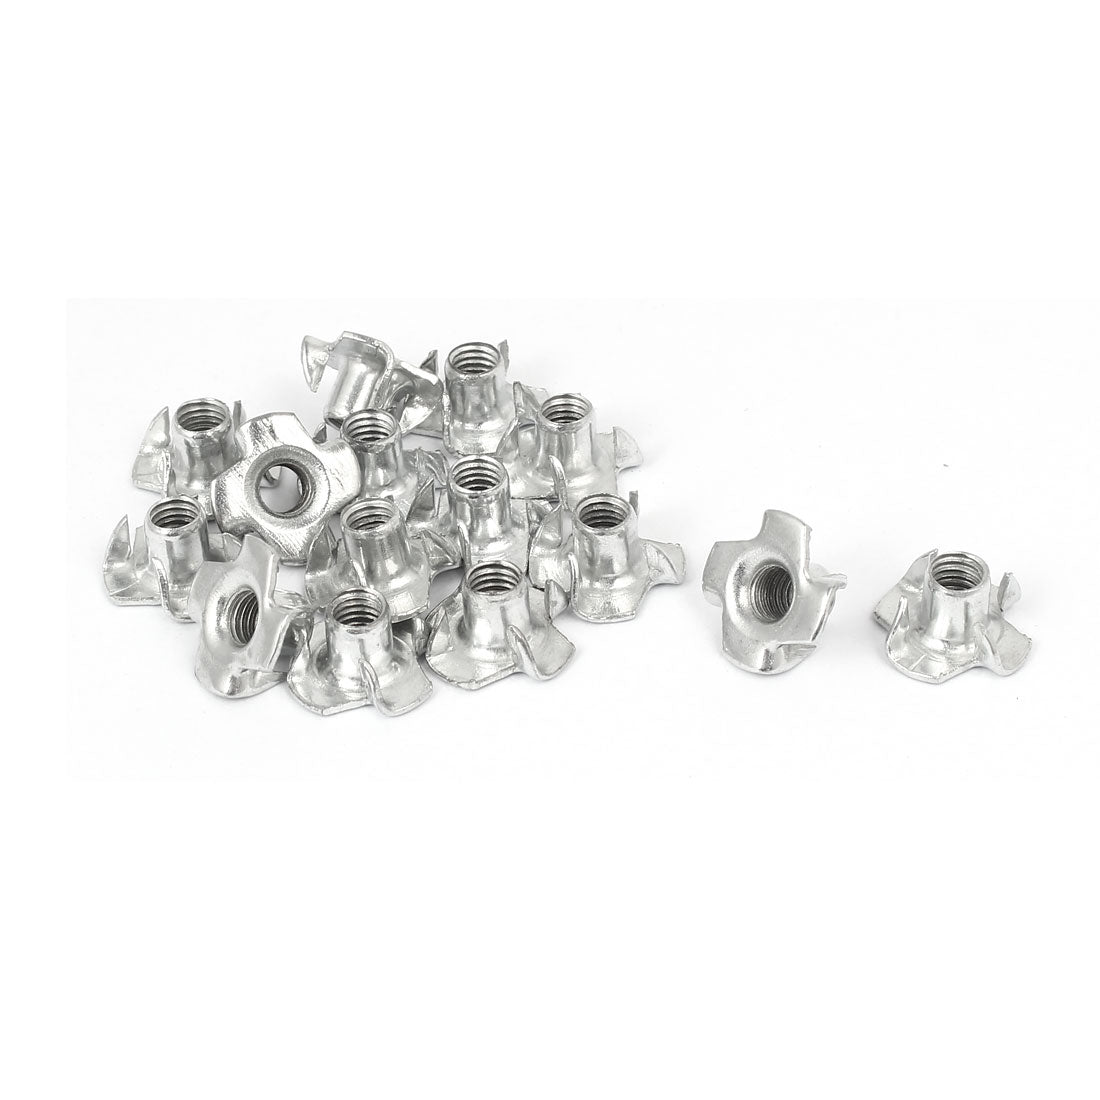 uxcell Uxcell Furniture M6 Thread 9mm Length Metal 4 Prong Tee Nuts Insert Connectors 15pcs